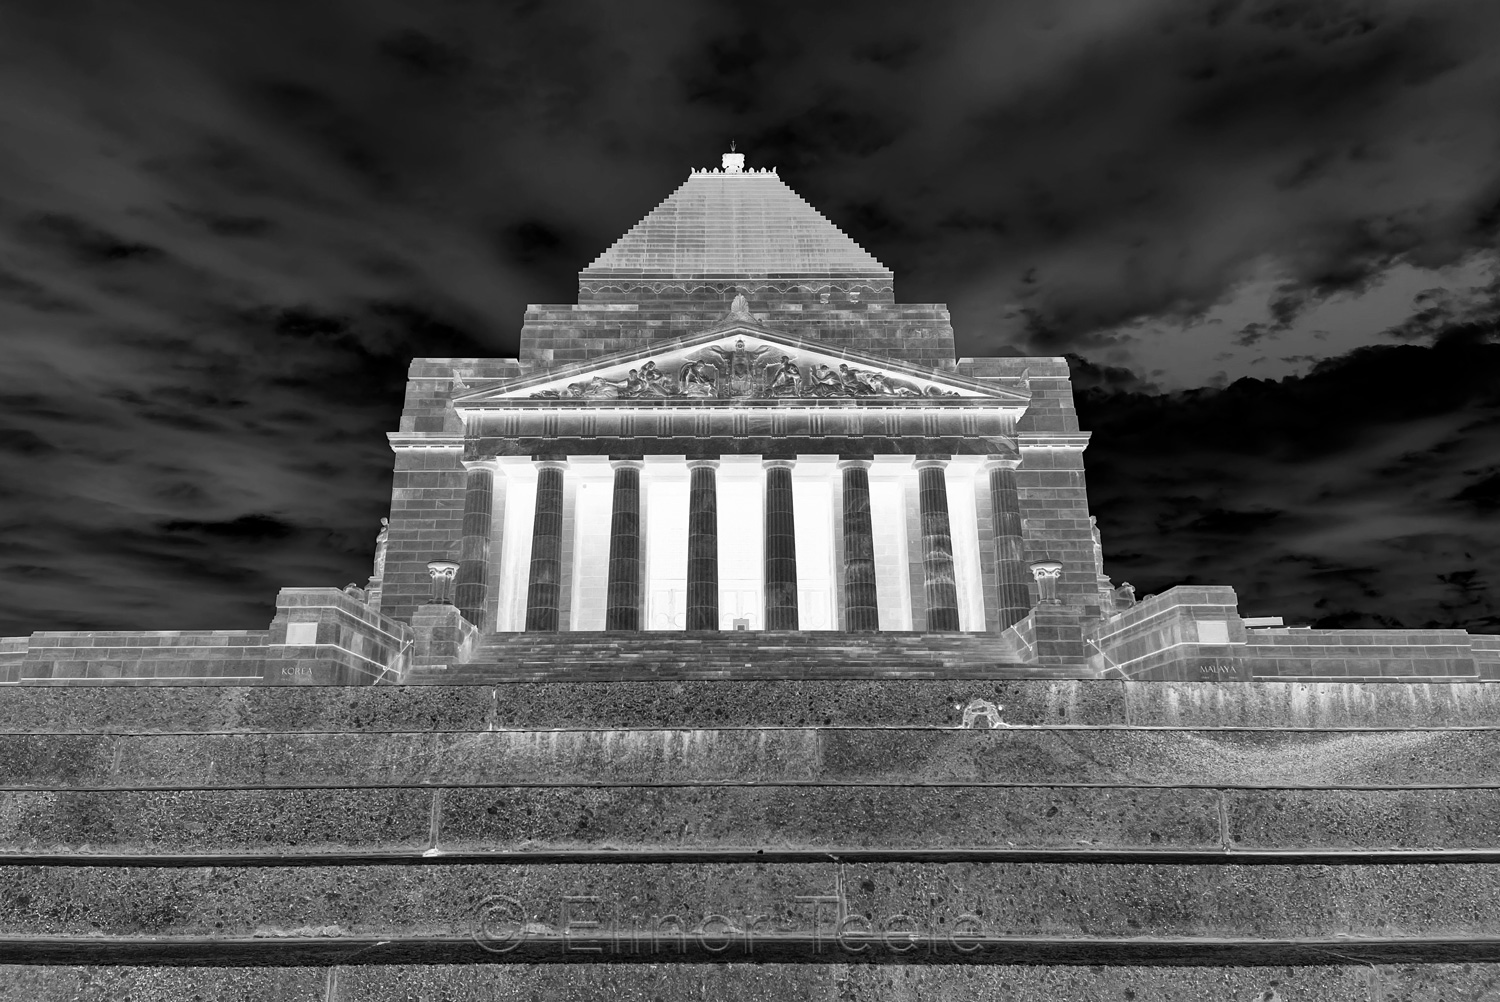 Abstract Melbourne - Shrine of Remembrance 7